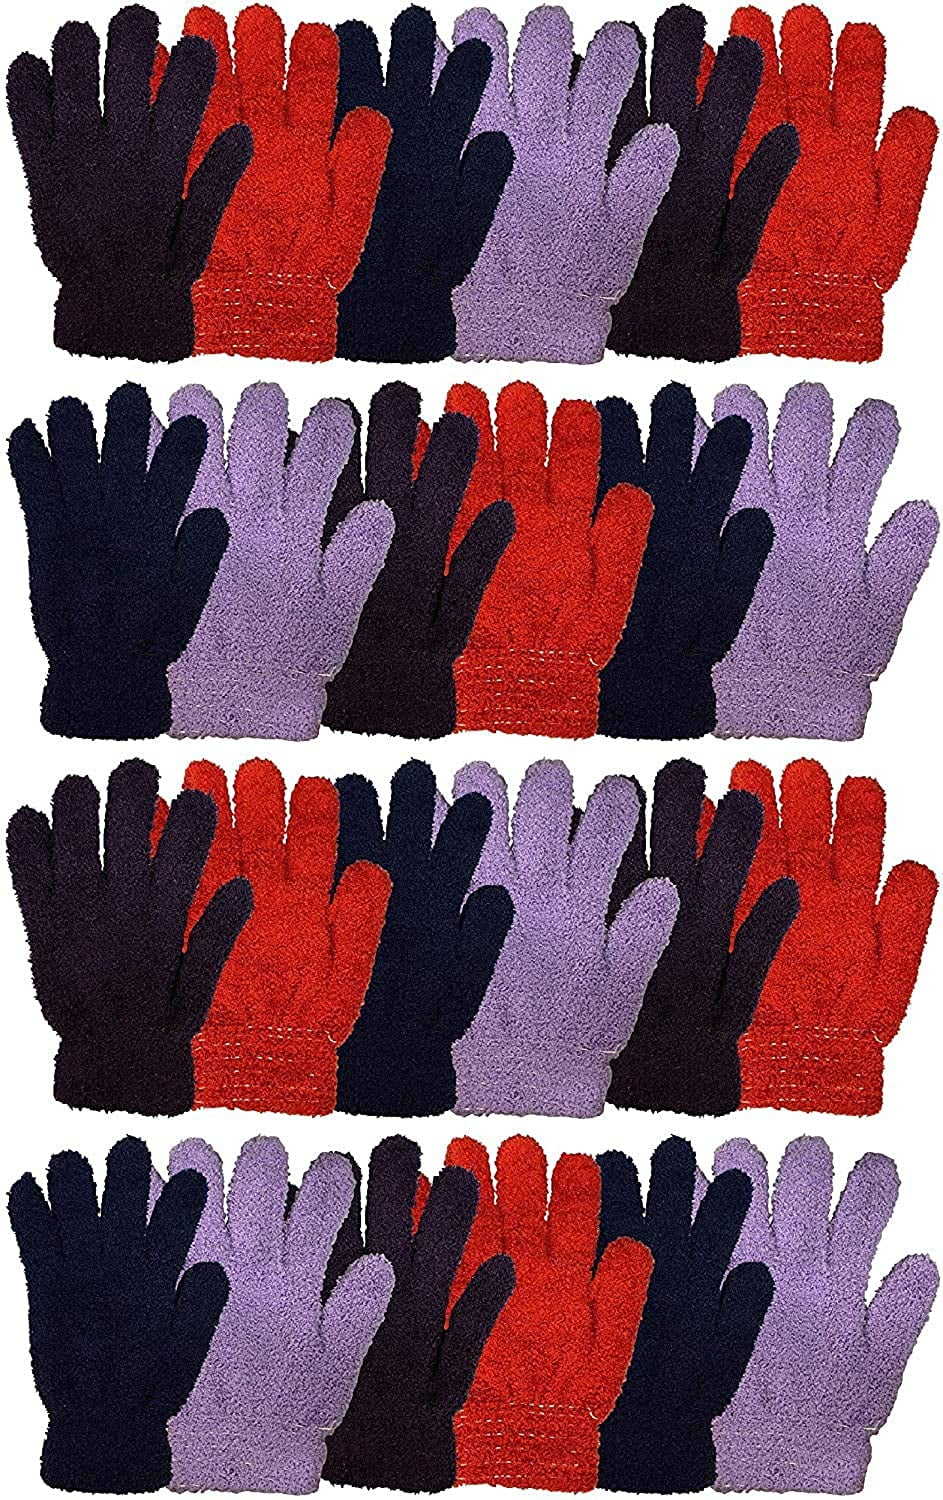 Cooraby 12 Pairs Winter Magic Gloves with Warm Thermal Lining Stretchy Knitted Jacquard Weave Gloves for Men Women or Teens 